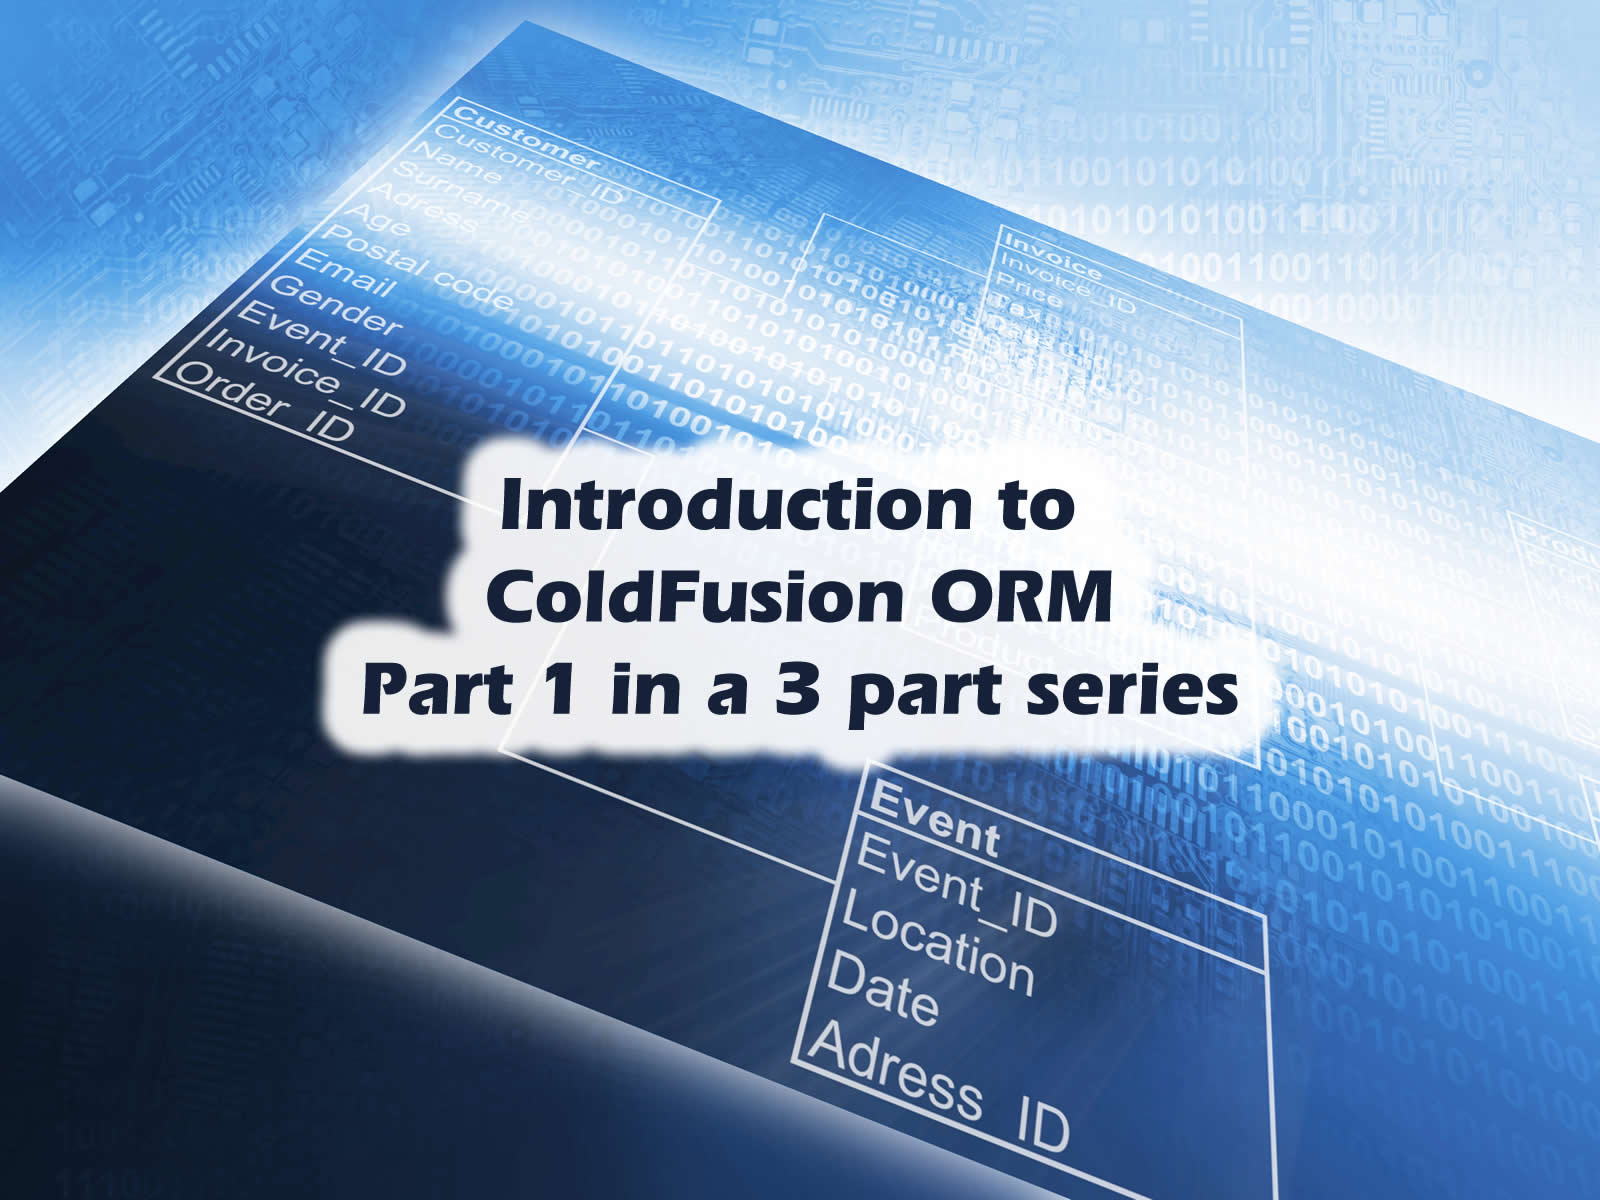 Introducing ColdFusion ORM